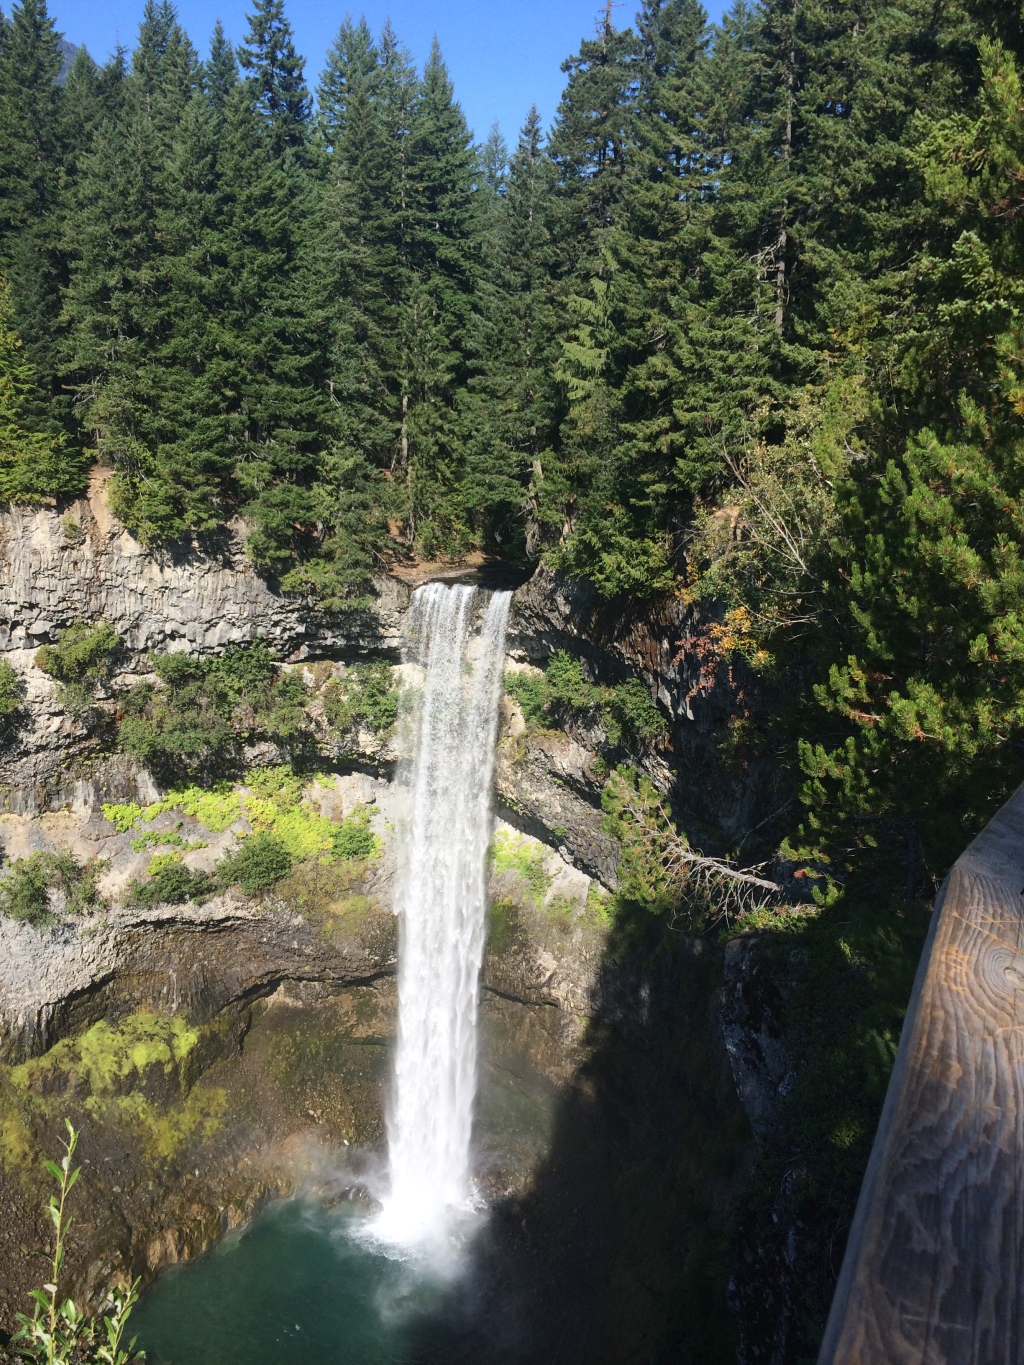 Shannon Falls – An Easy And Popular Hike For The Entire Family